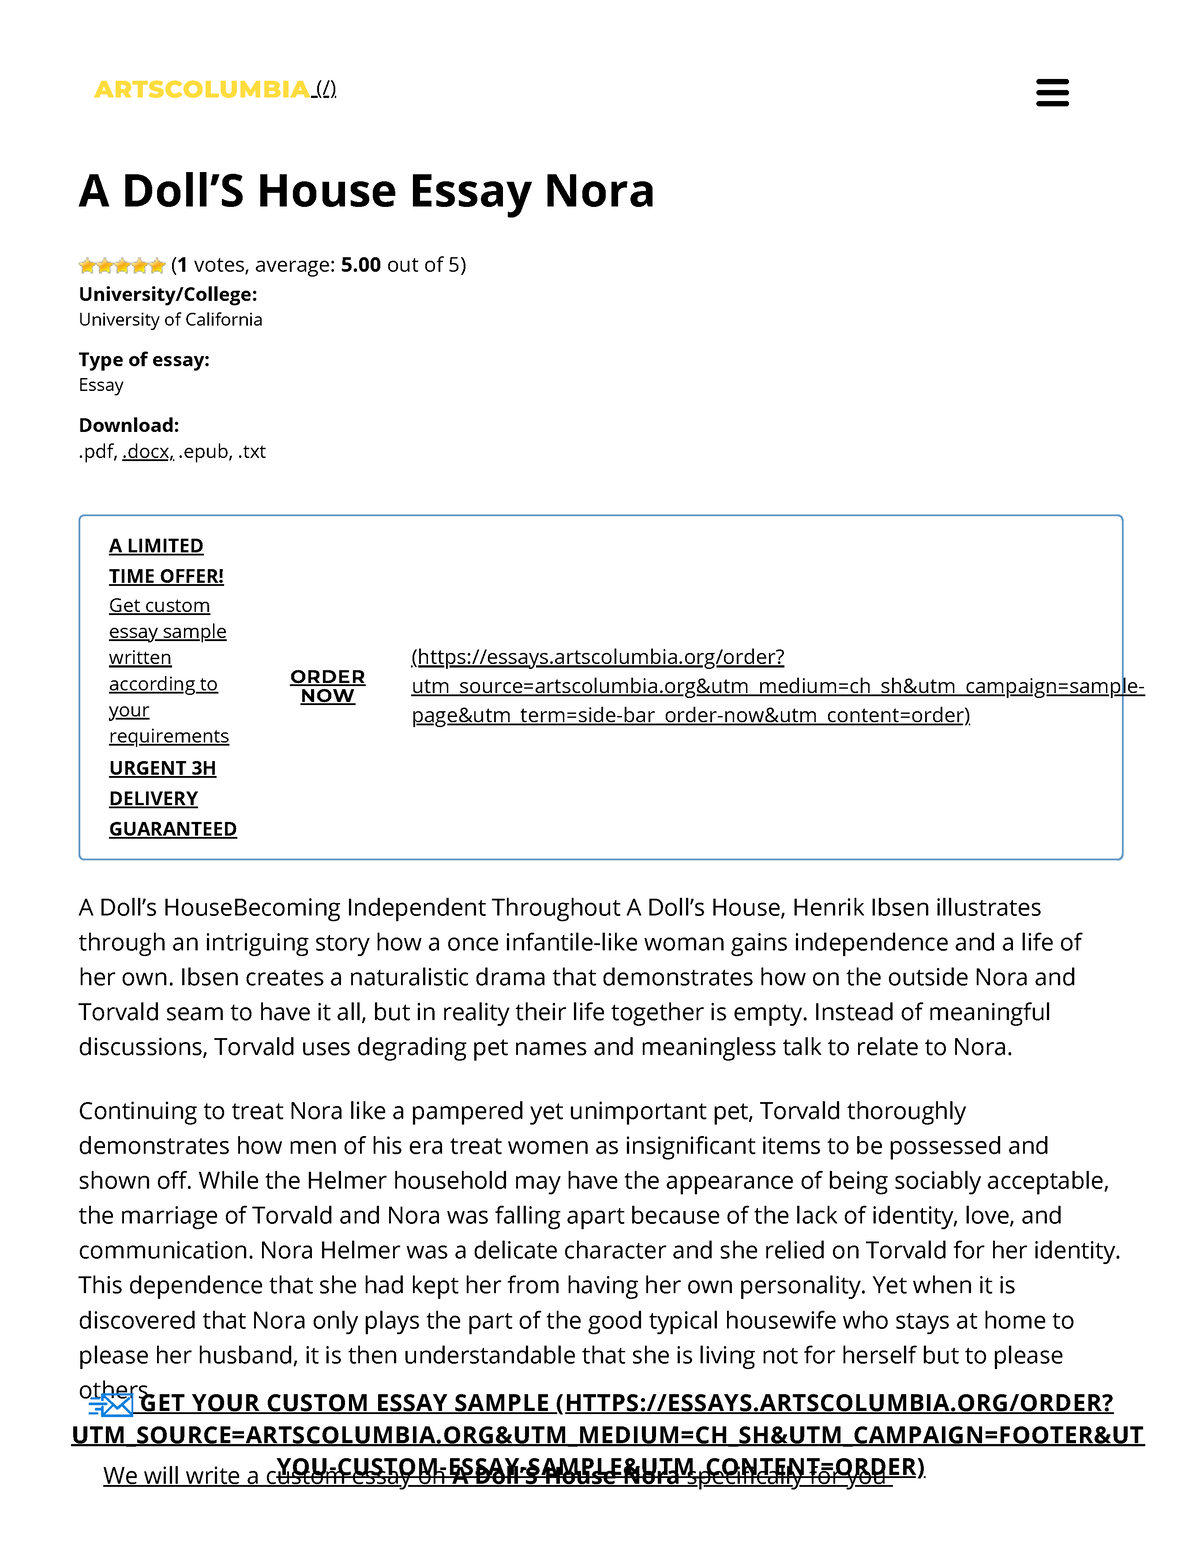 essay questions on doll's house